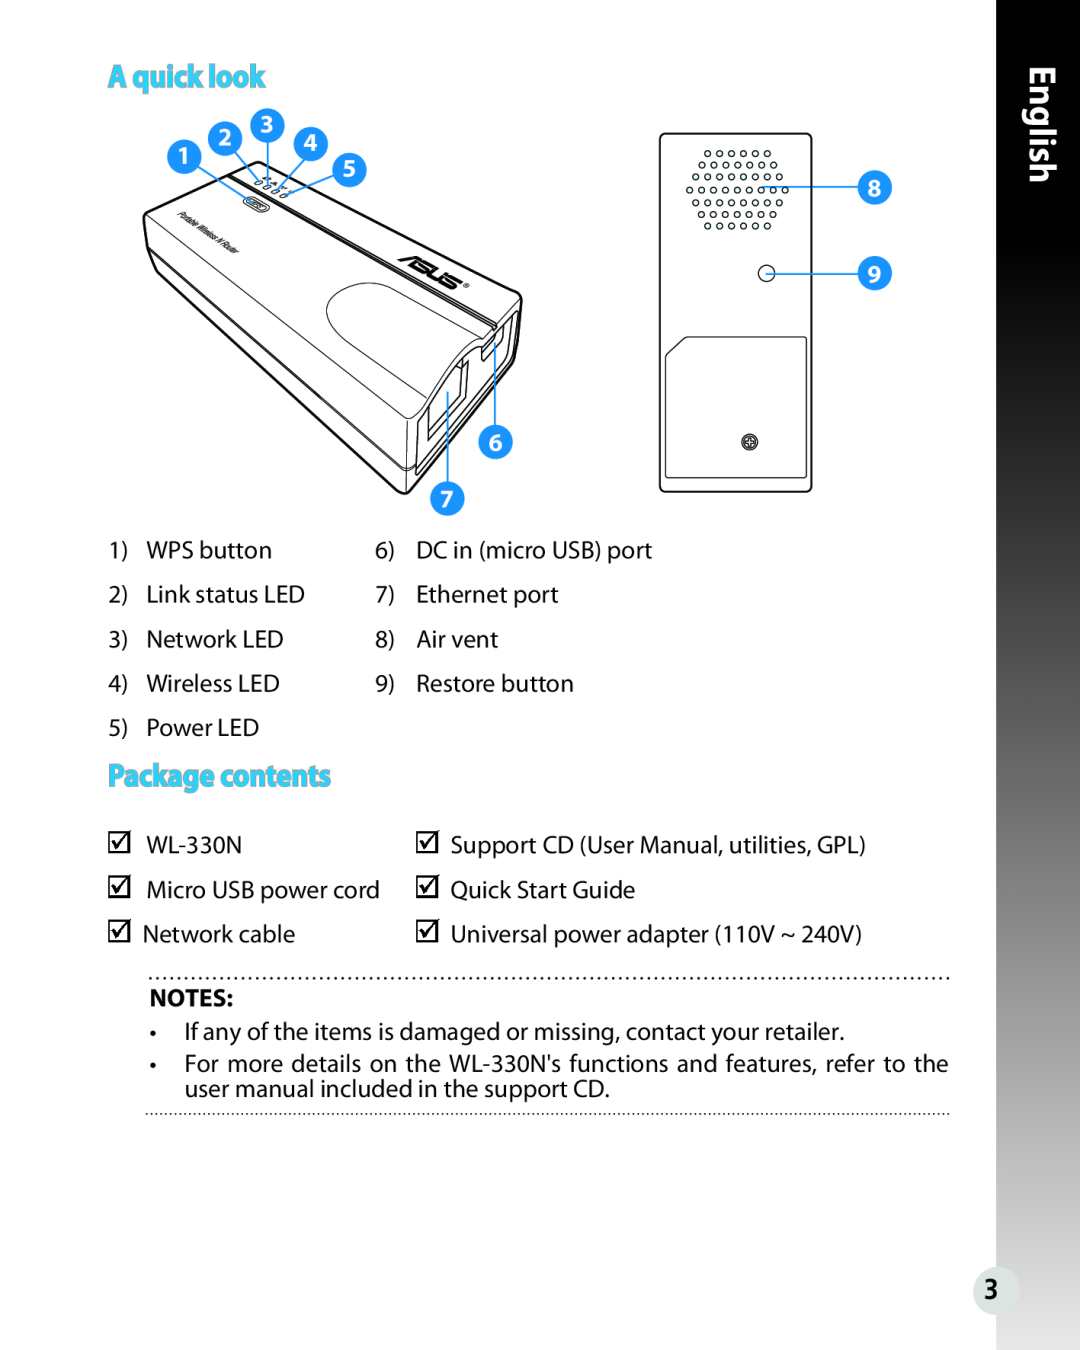 Asus WL330N quick start English, A quick look, Package contents 